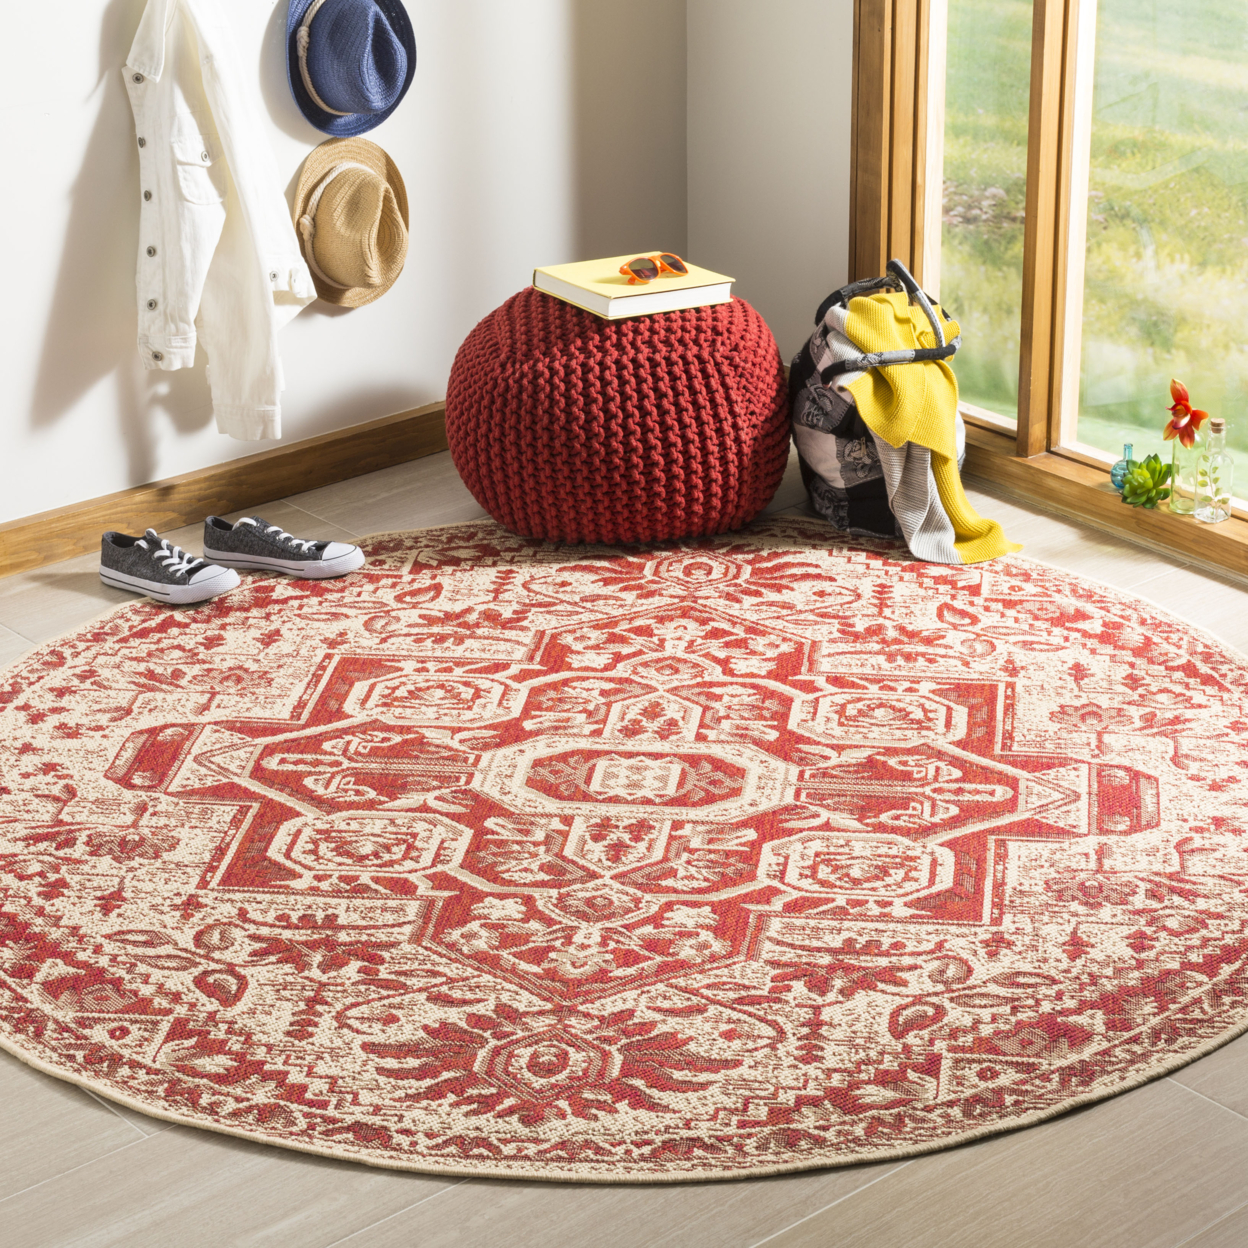 SAFAVIEH Outdoor LND138Q Linden Collection Red / Creme Rug - image 2 of 10